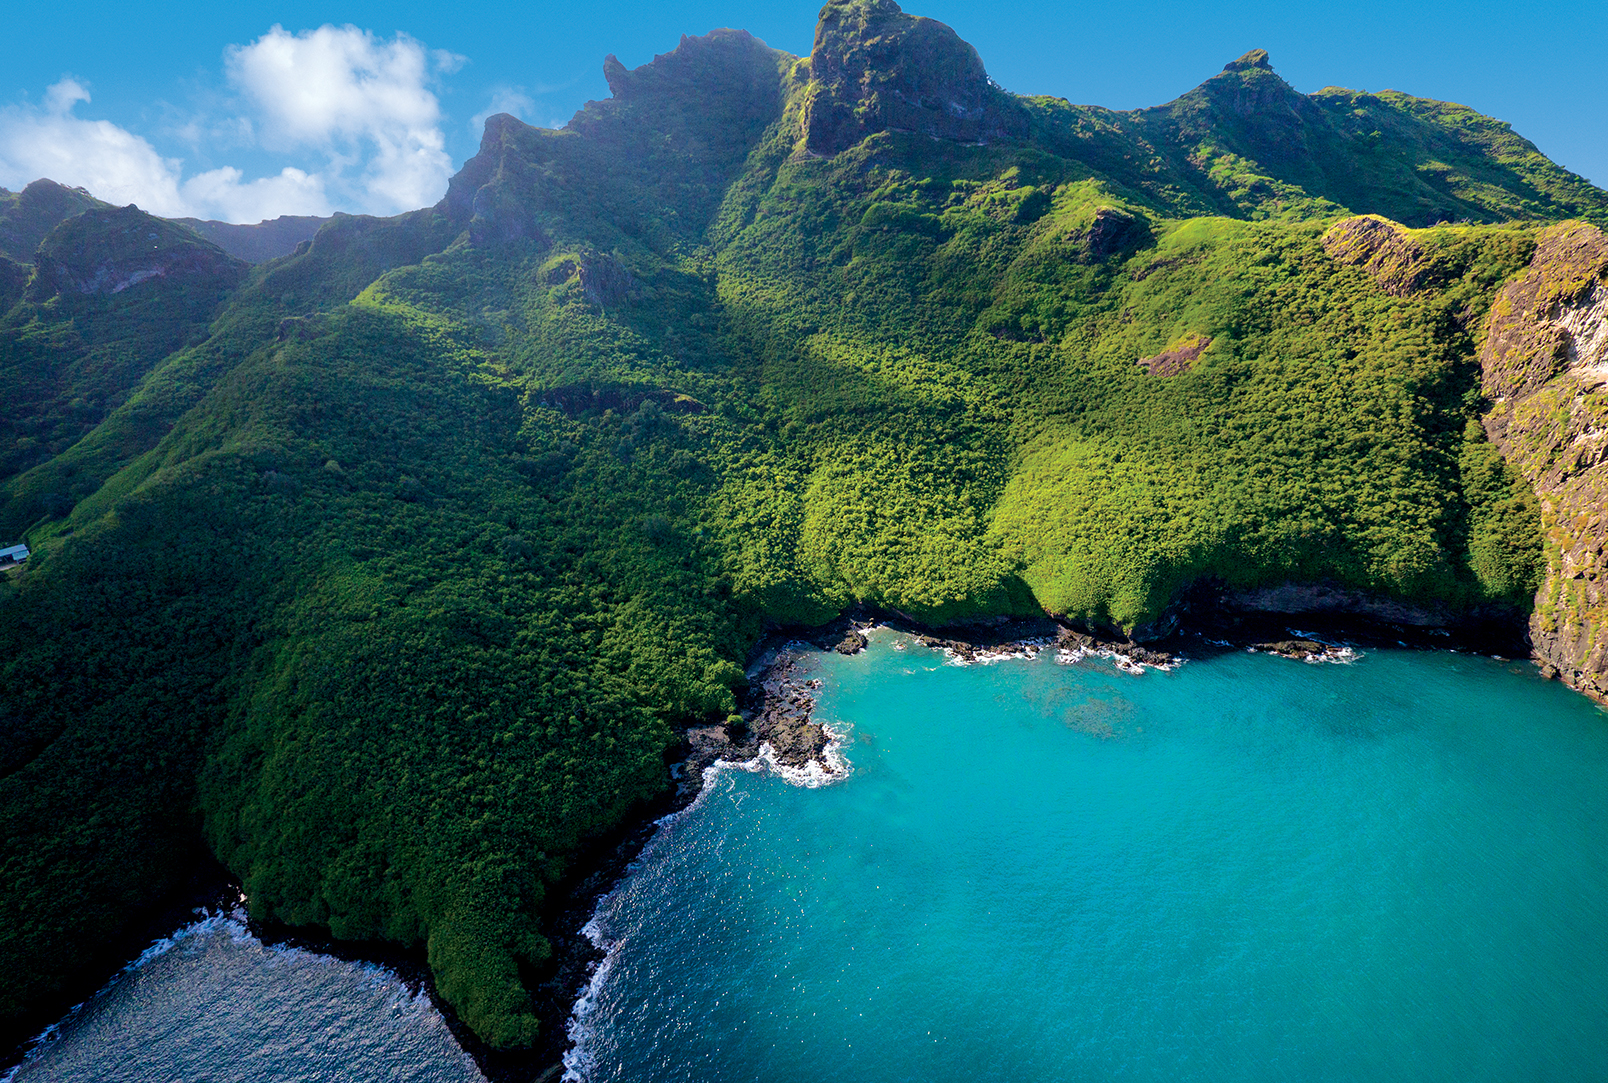 Cloaked in mystery, the islands of the Marquesas rise from the ocean with a beautifully commanding presence; Nuku Hiva is pictured here.